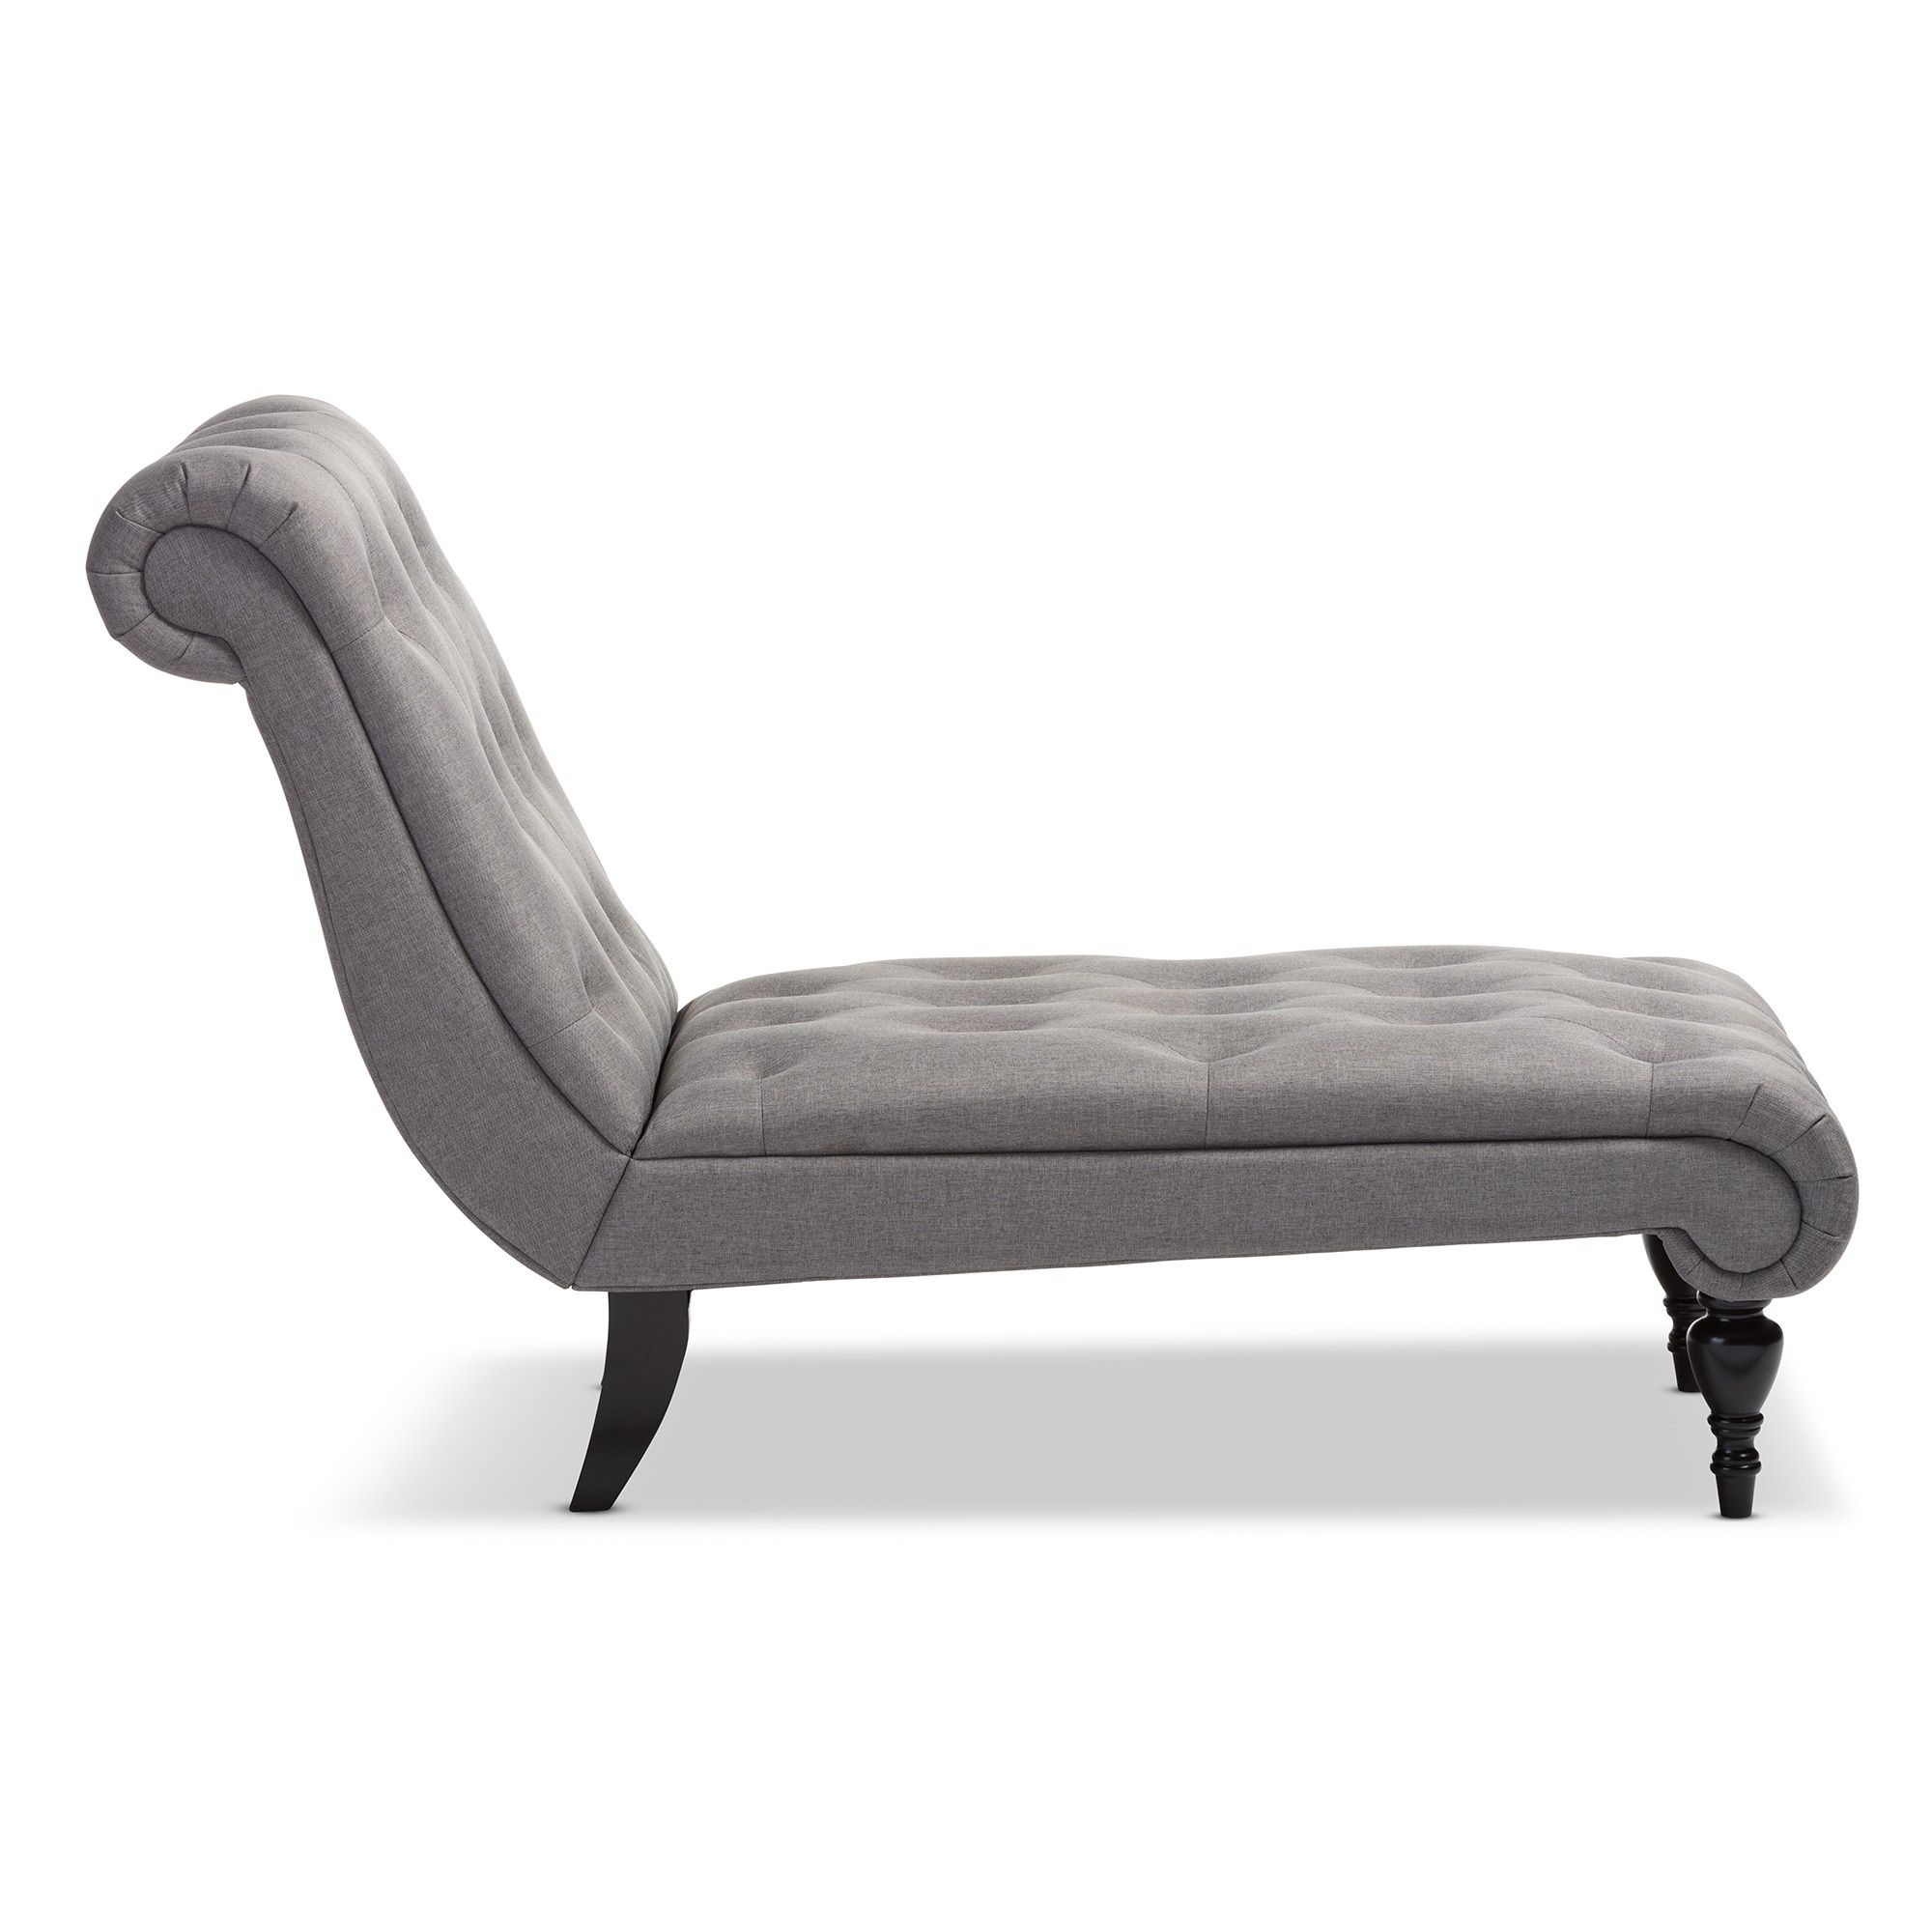 Baxton Studio Layla Mid Century Retro Modern Grey Fabric Pertaining To Favorite Gray Chaise Lounges (View 11 of 15)